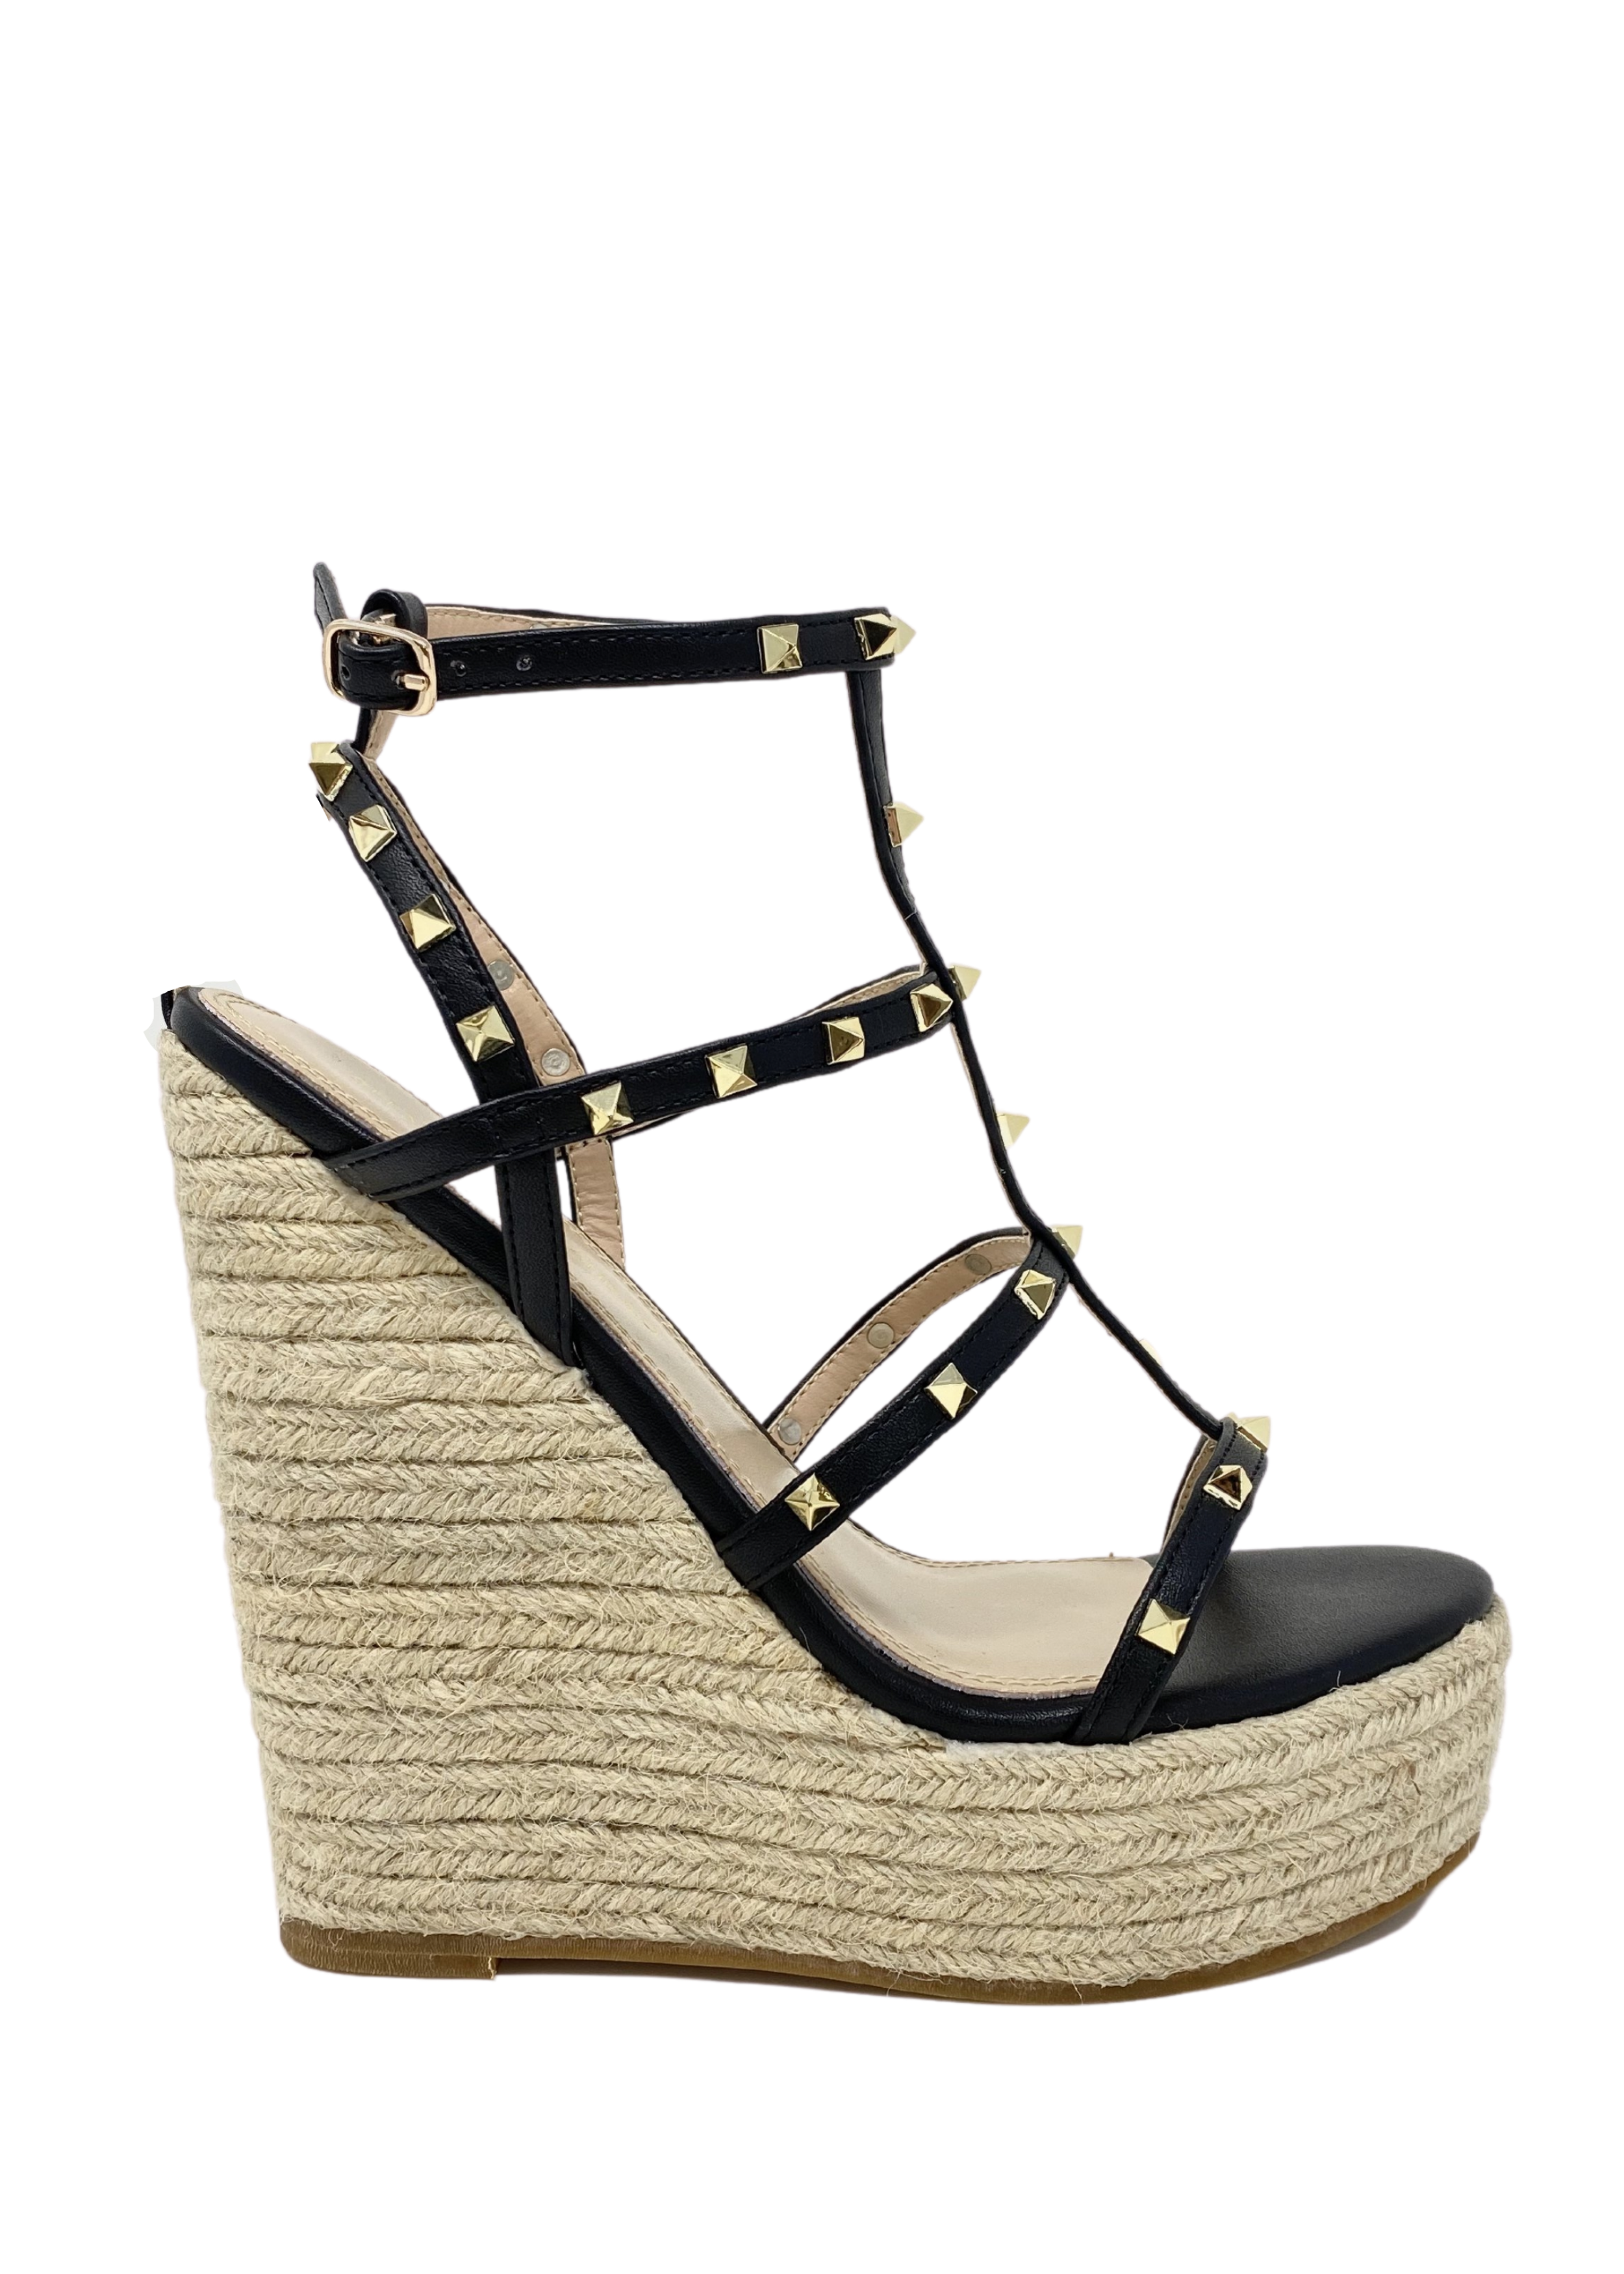 Astrid Wedges in Black that has a espadrille wedge and multi strap gold studded wedge. 